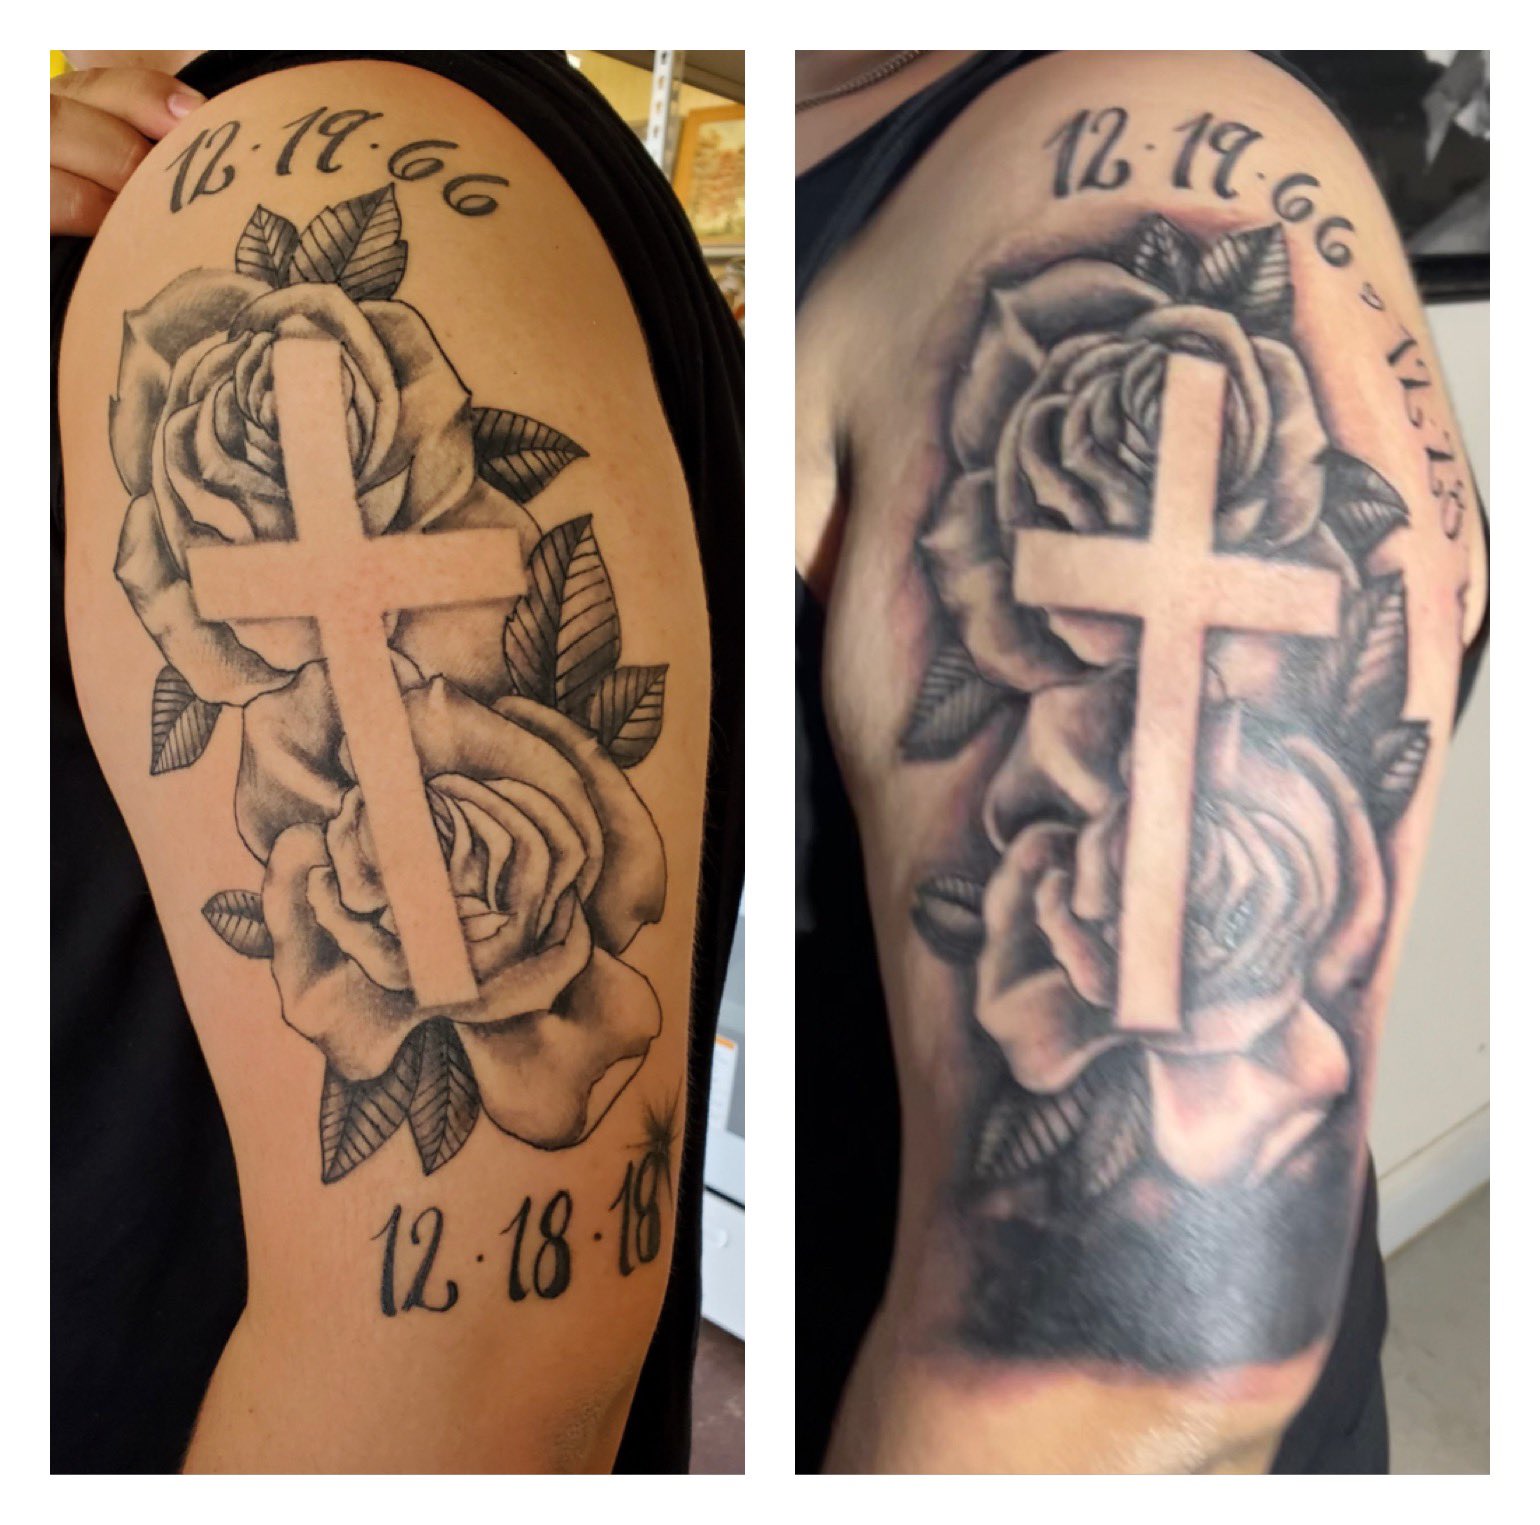 Cross Tattoos for Guys  Tattoo Ideas and Designs for Men